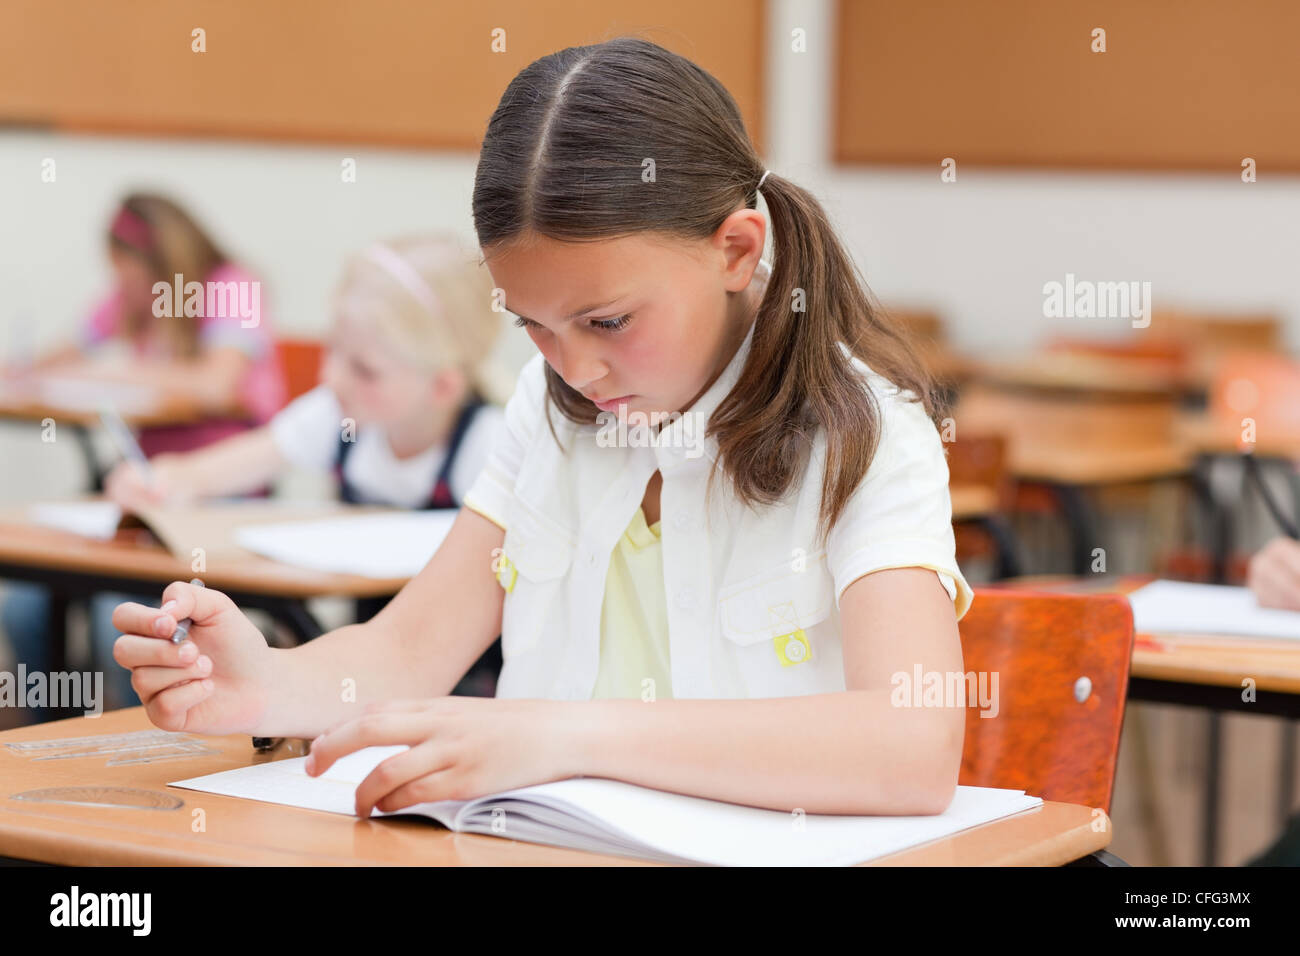 Elementary student working on exercise book Stock Photo